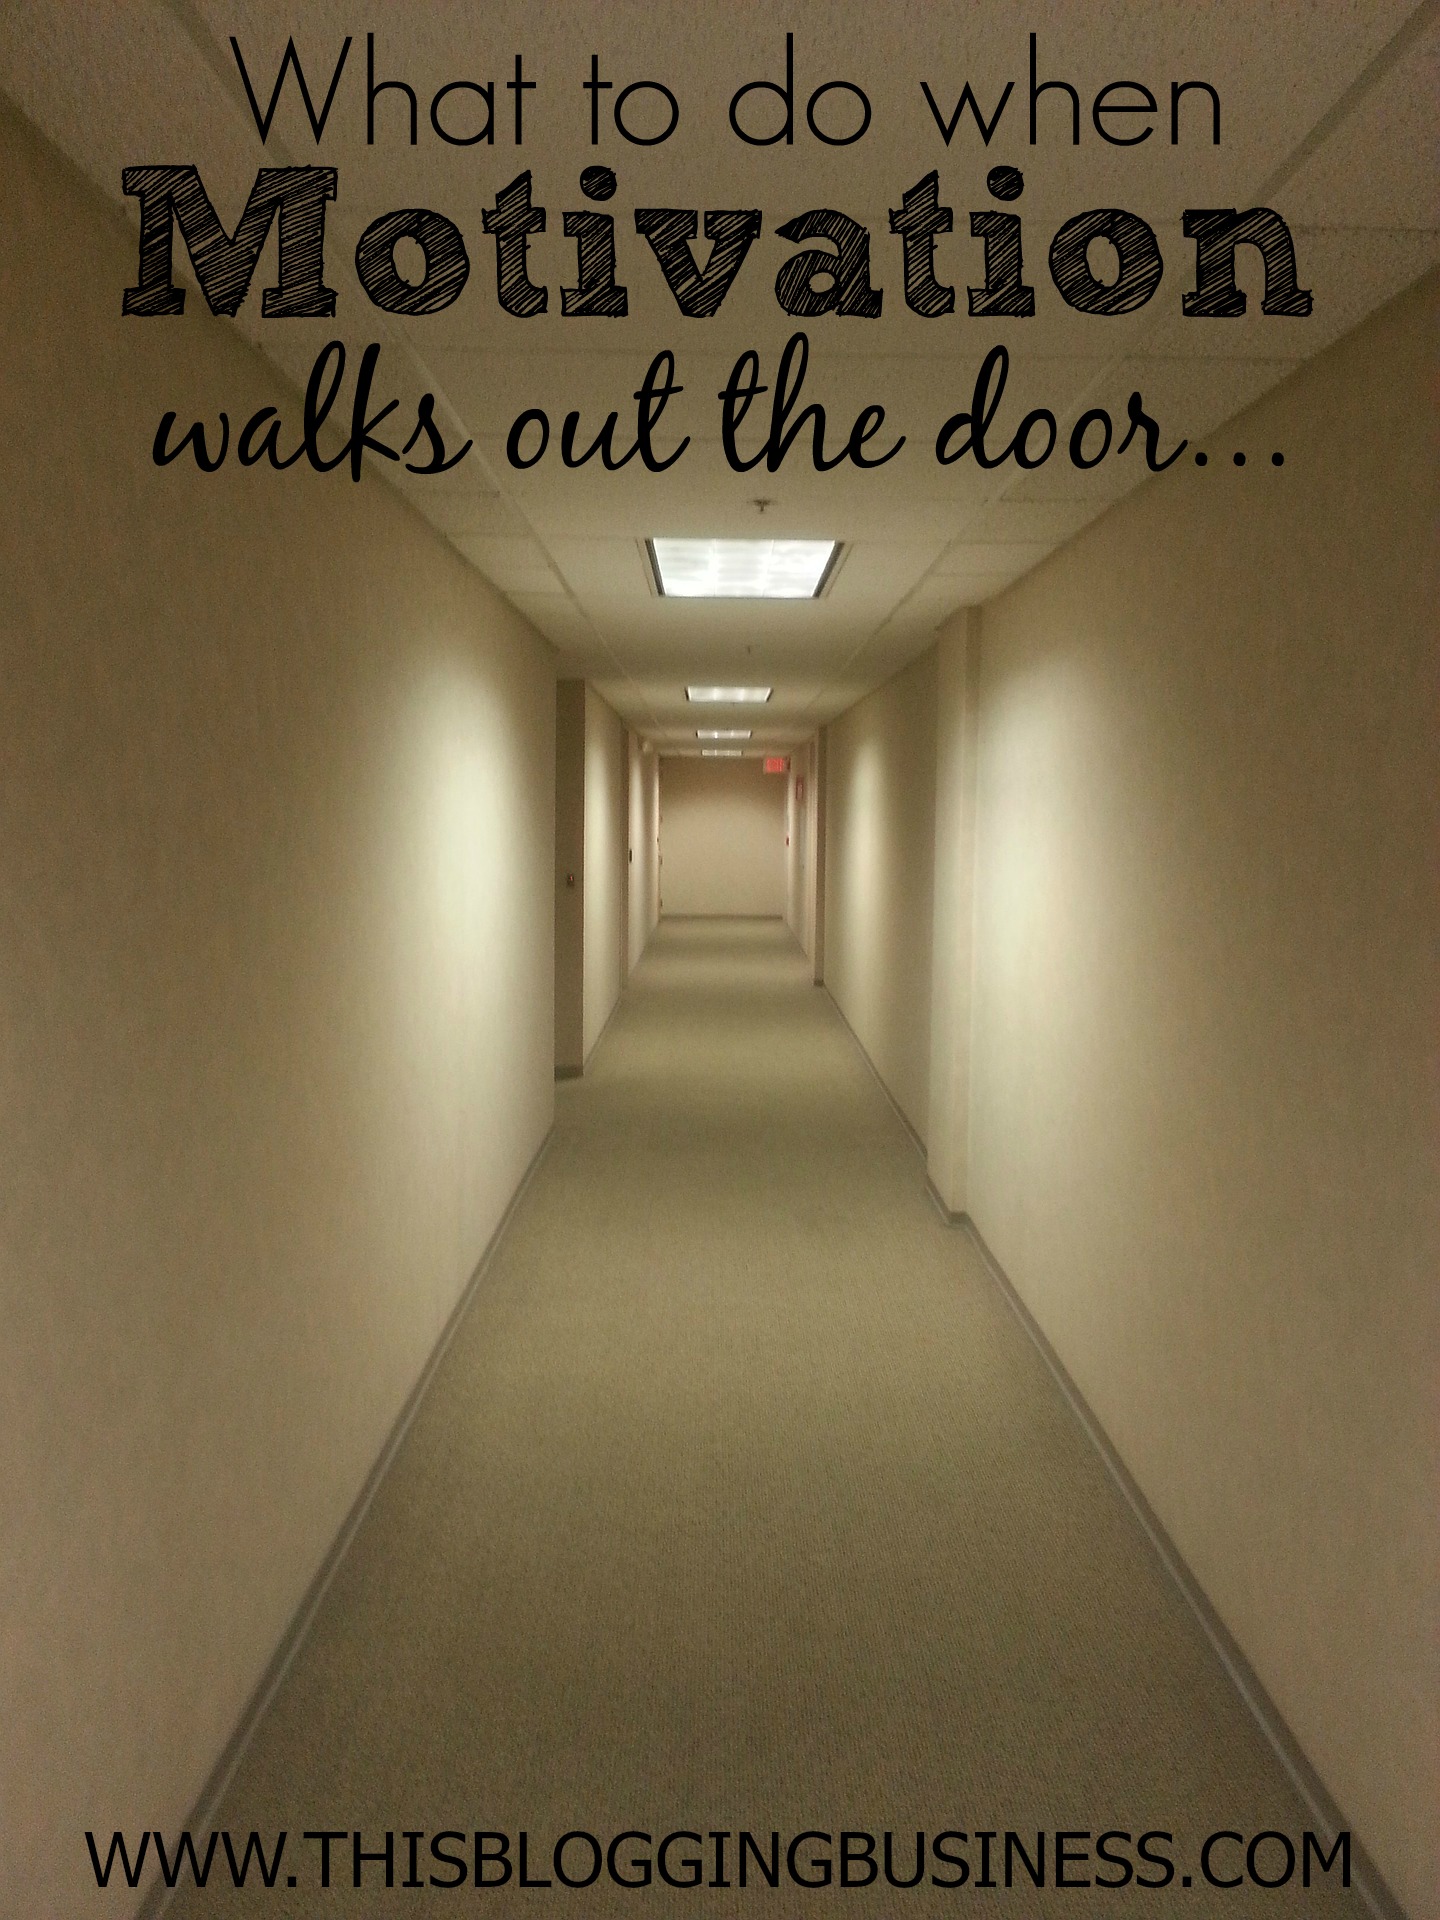 Motivation walks out the door - what to do when you just can't seem to make yourself do the things that you know you should... those things that move you closer to your goals. Here's one little trick I use to get myself to do those tasks which I seem to be always putting off.